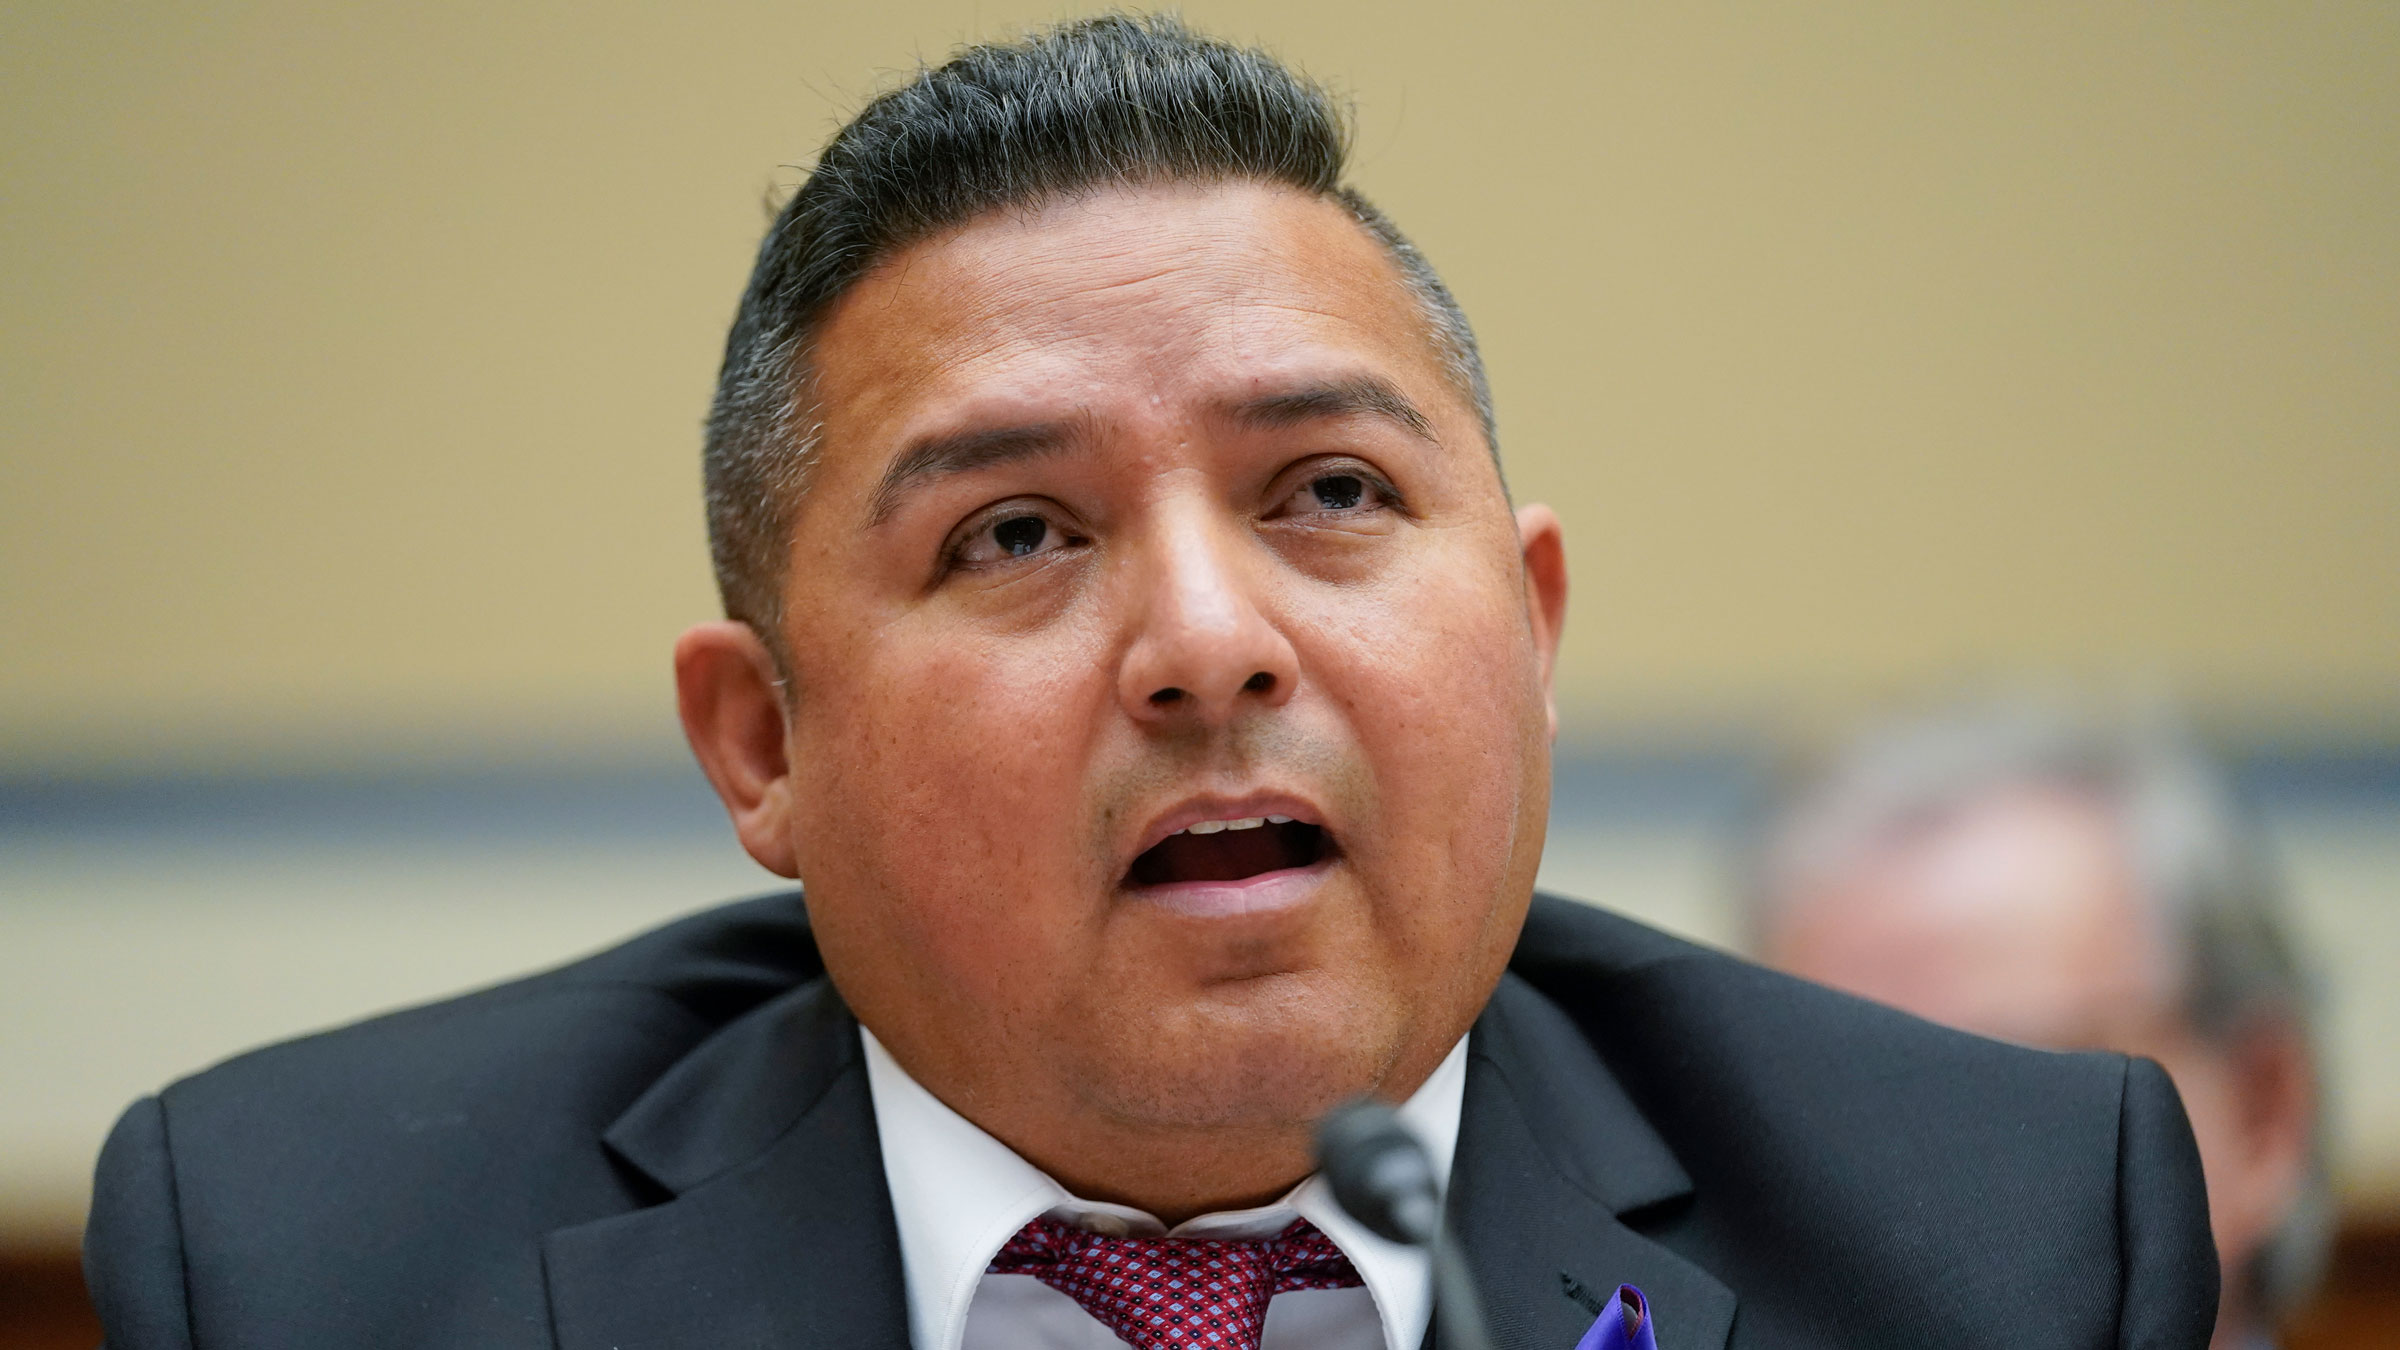 Roy Guerrero, a pediatrician from Uvalde, Texas, speaks during Wednesday's hearing.